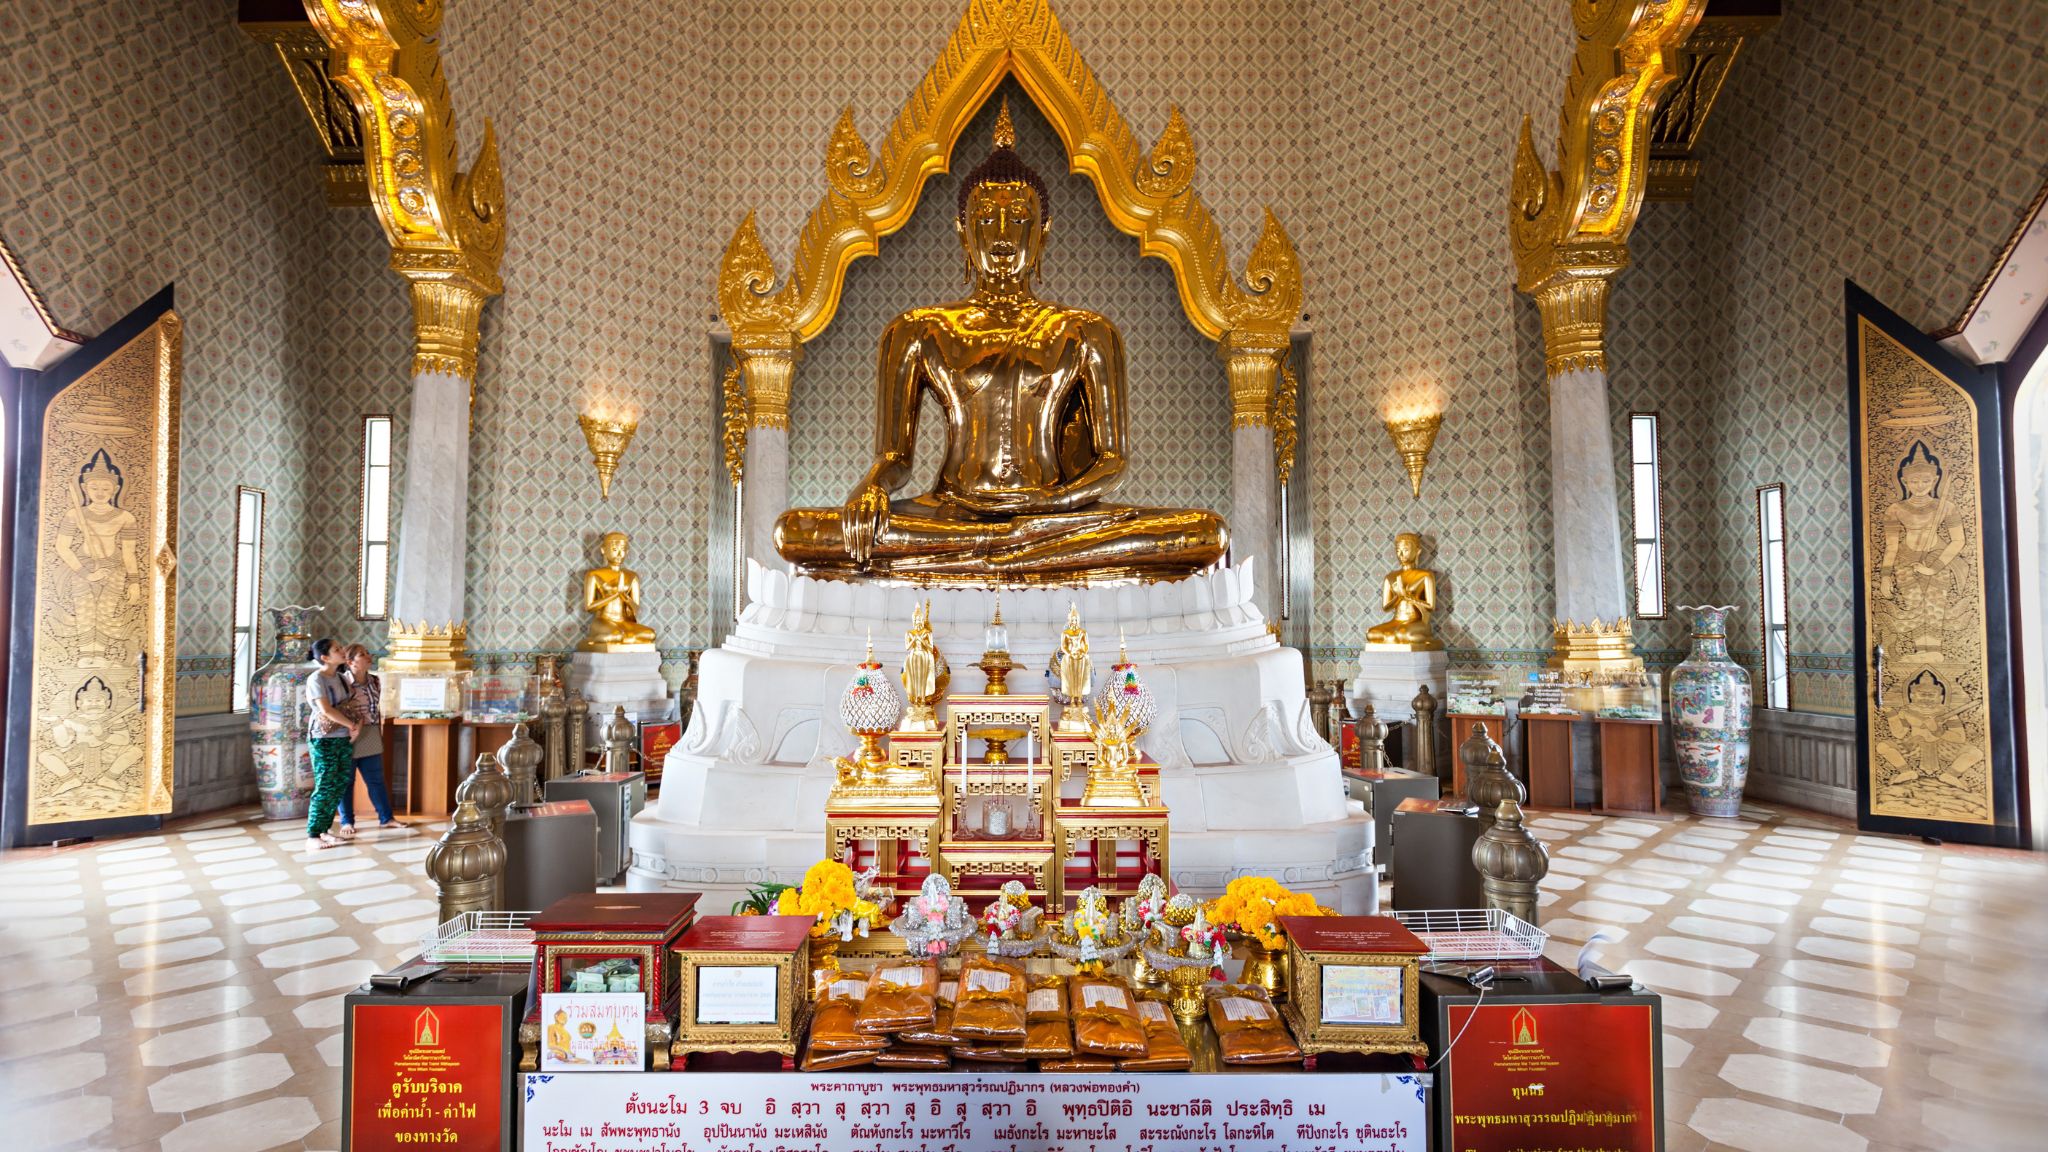 Day 2 Explore The Diverse Culture In Wat Traimit